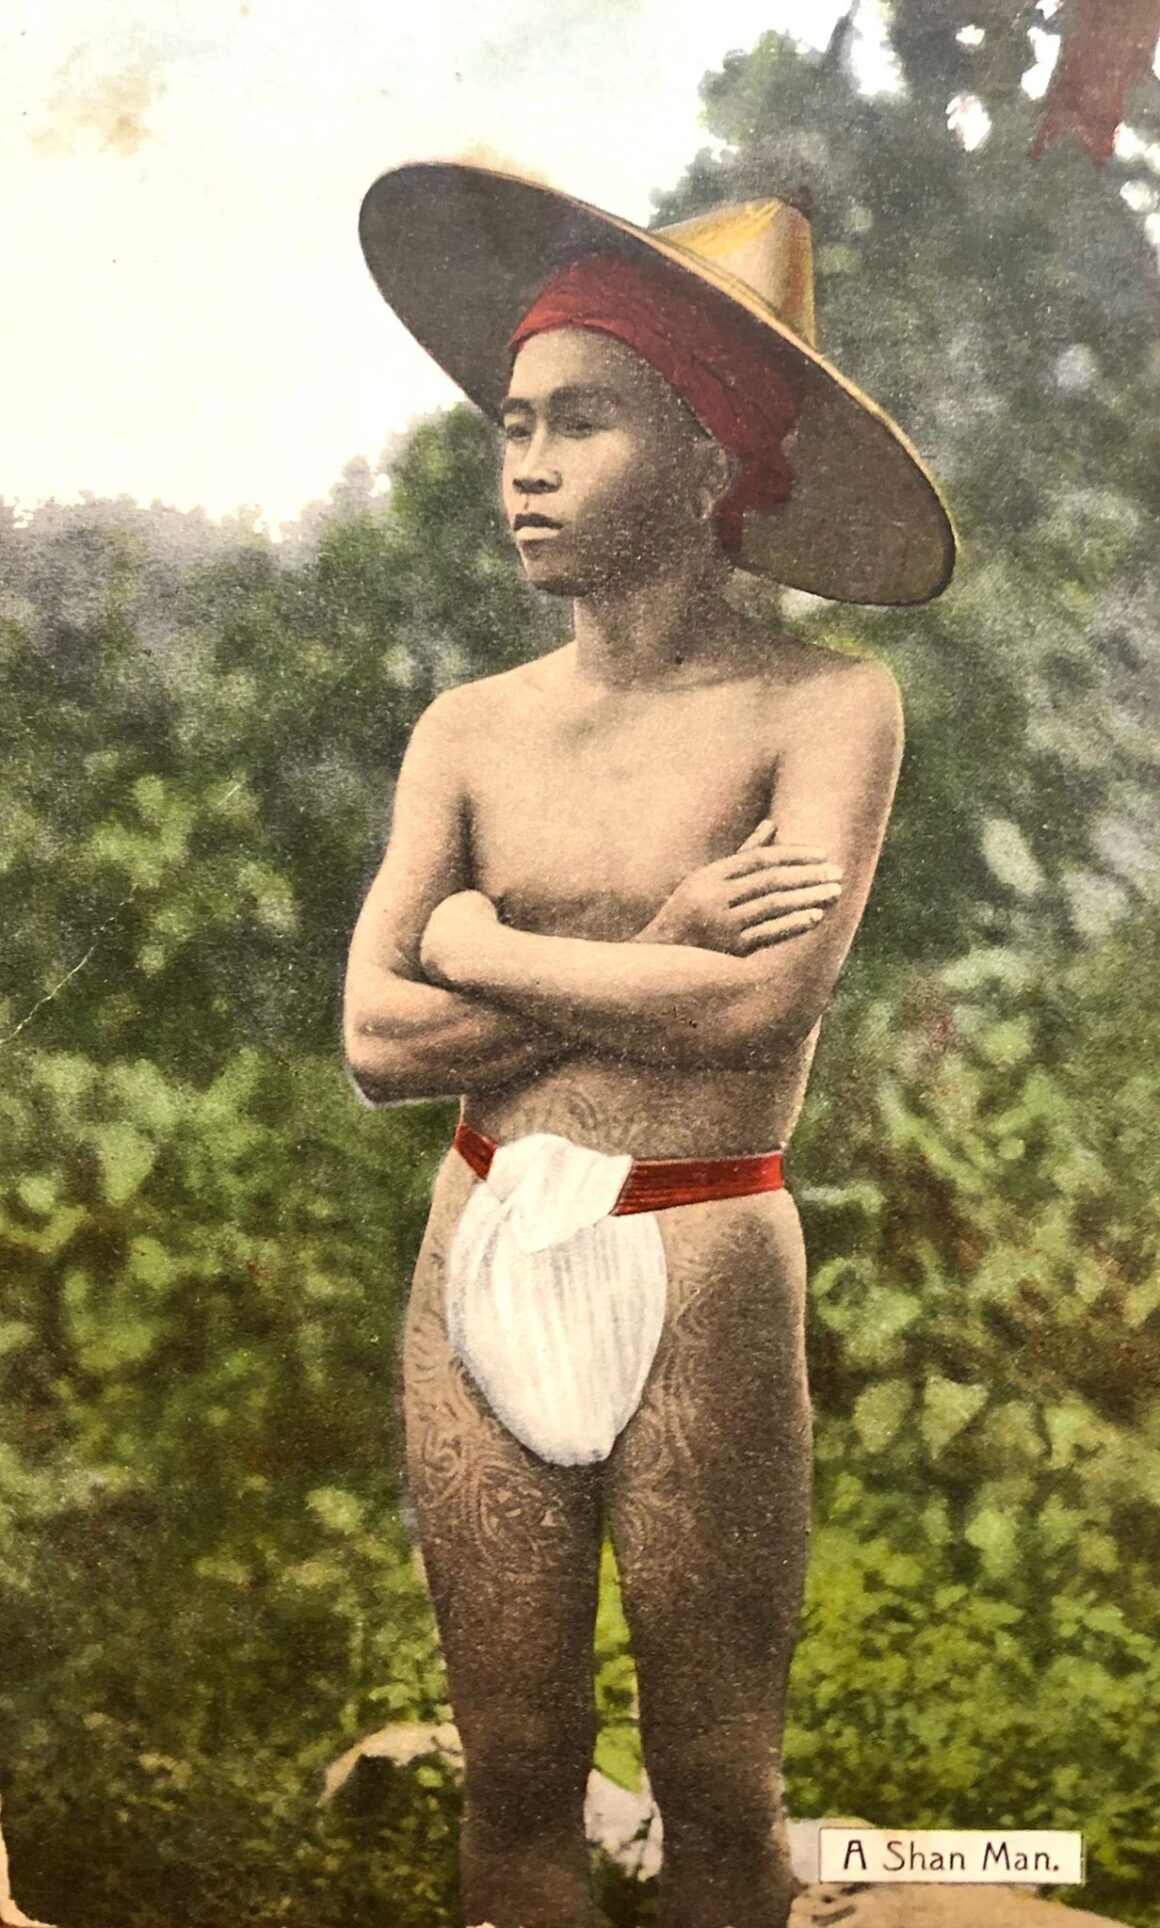 Photo postcard displacing a Burmese Shan Man, first decade of the XIX century, from private collection of Gabriele Gori